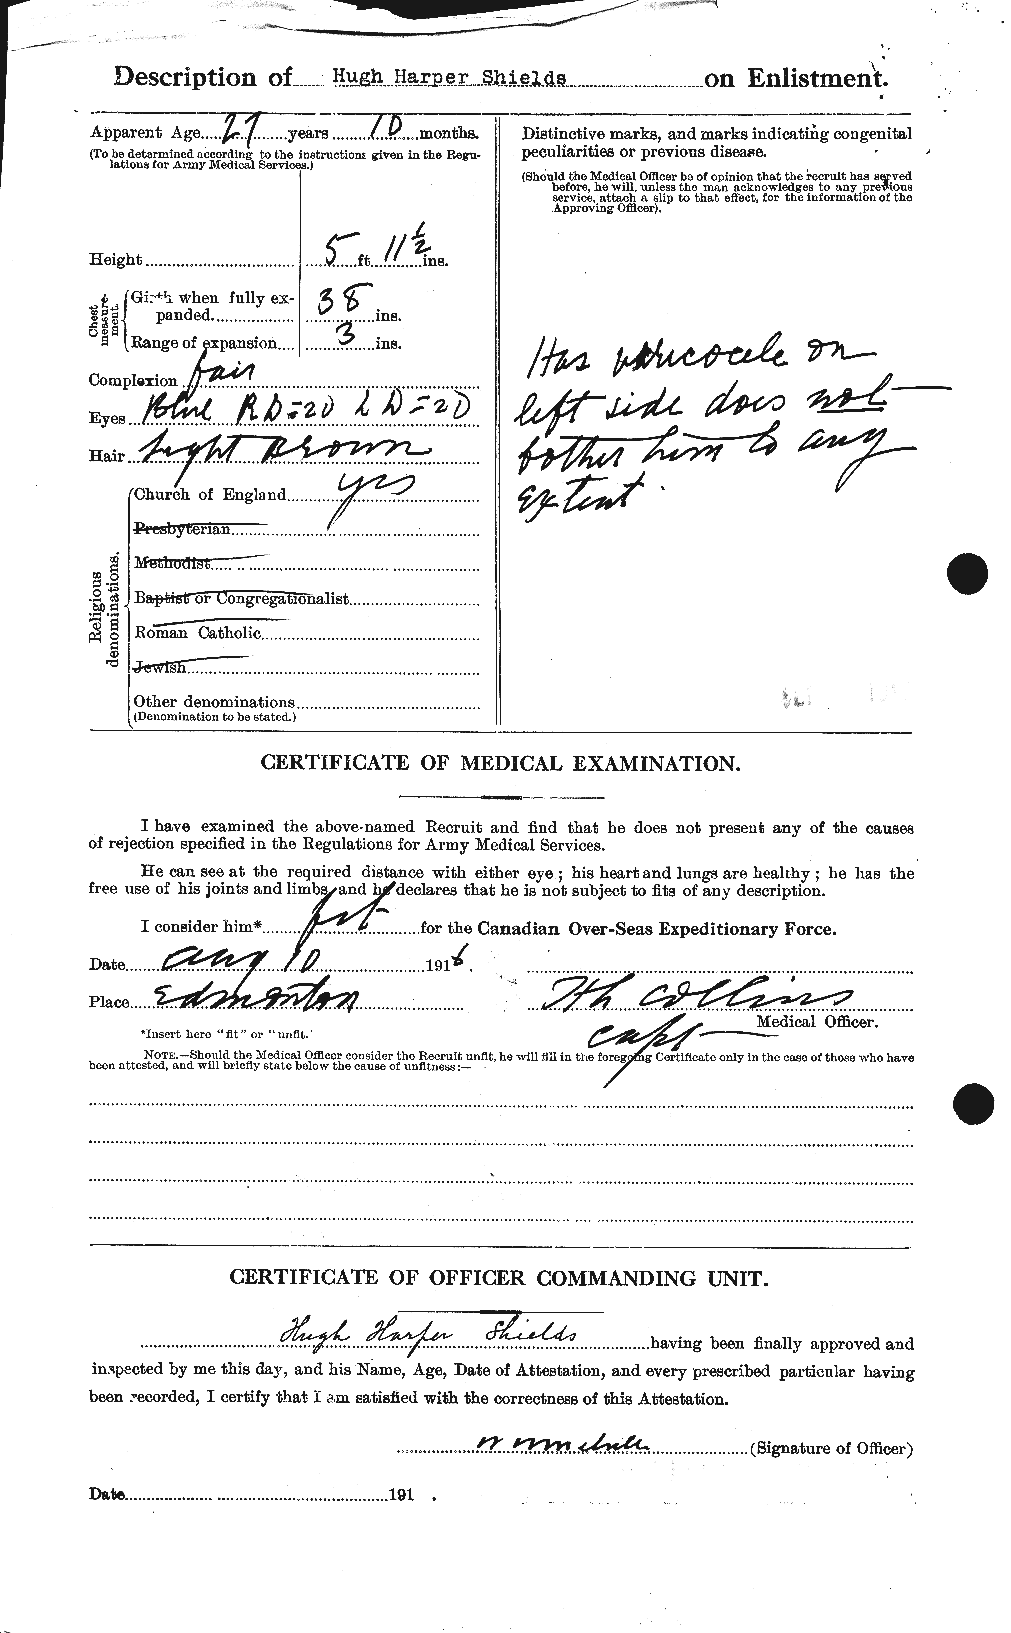 Personnel Records of the First World War - CEF 090399b